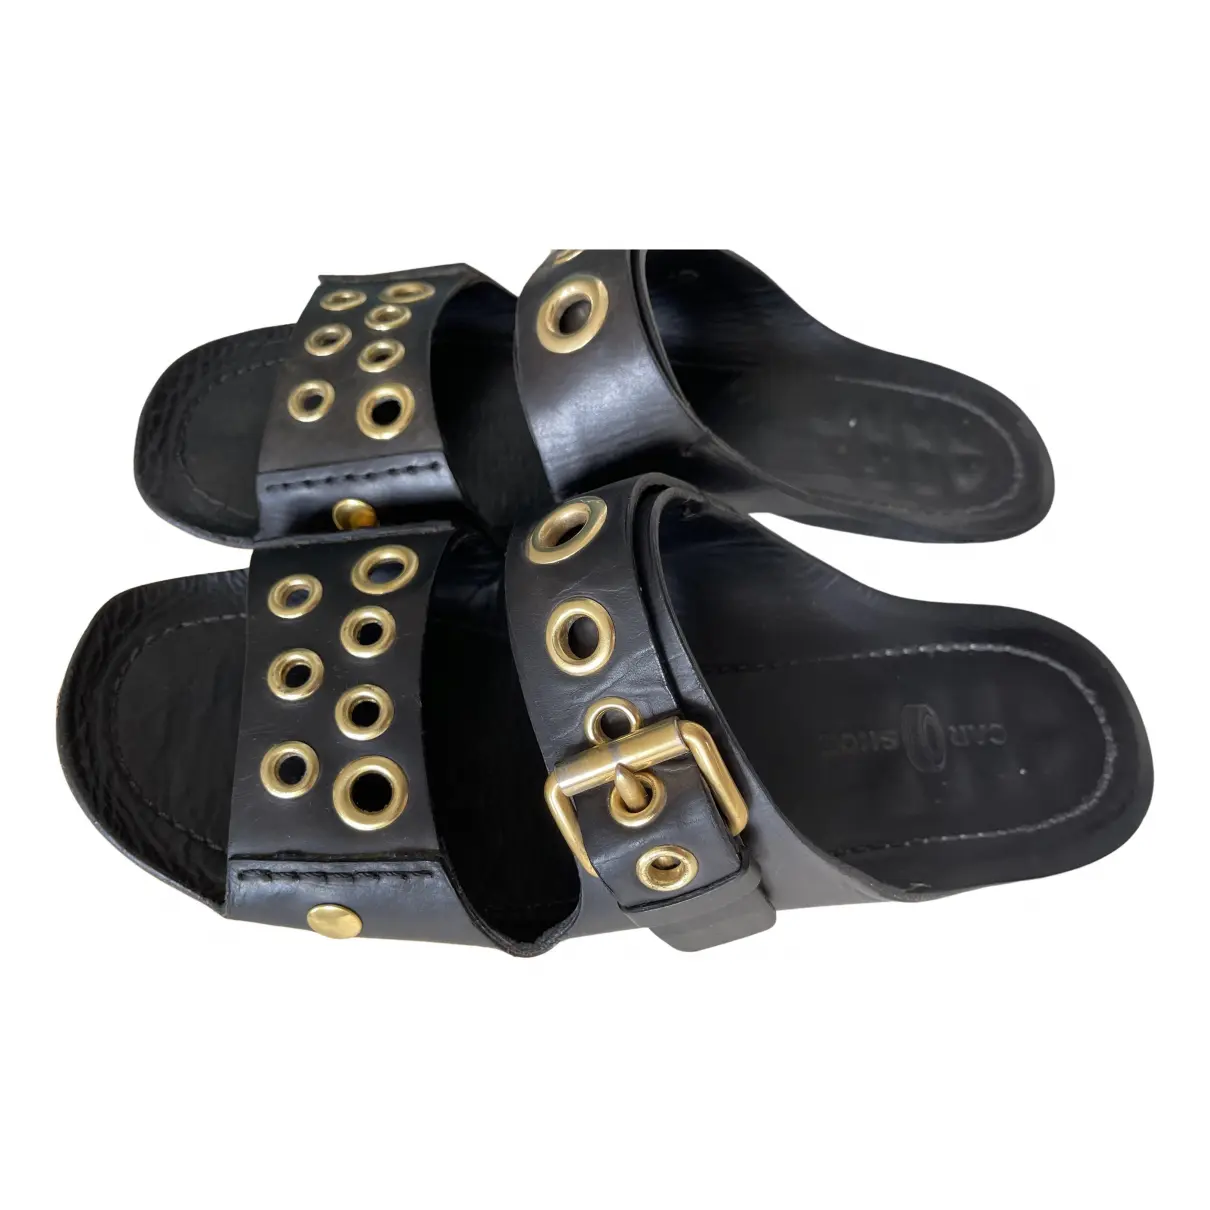 Leather sandals Carshoe